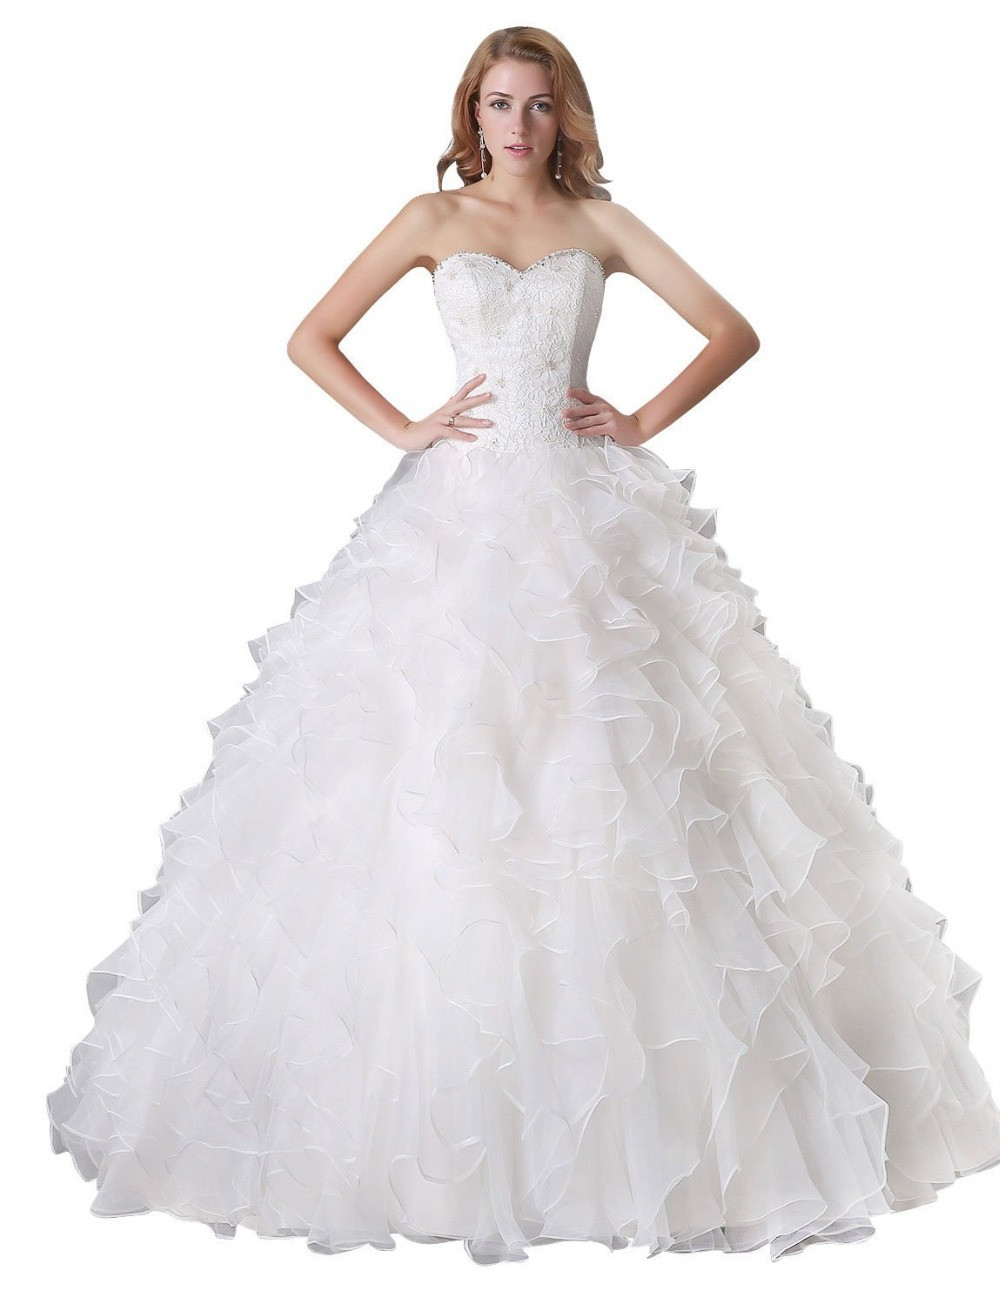 Vintage Ball Gown Wedding Dresses
 Aliexpress Buy 2015 casamento Vintage Ball Gown